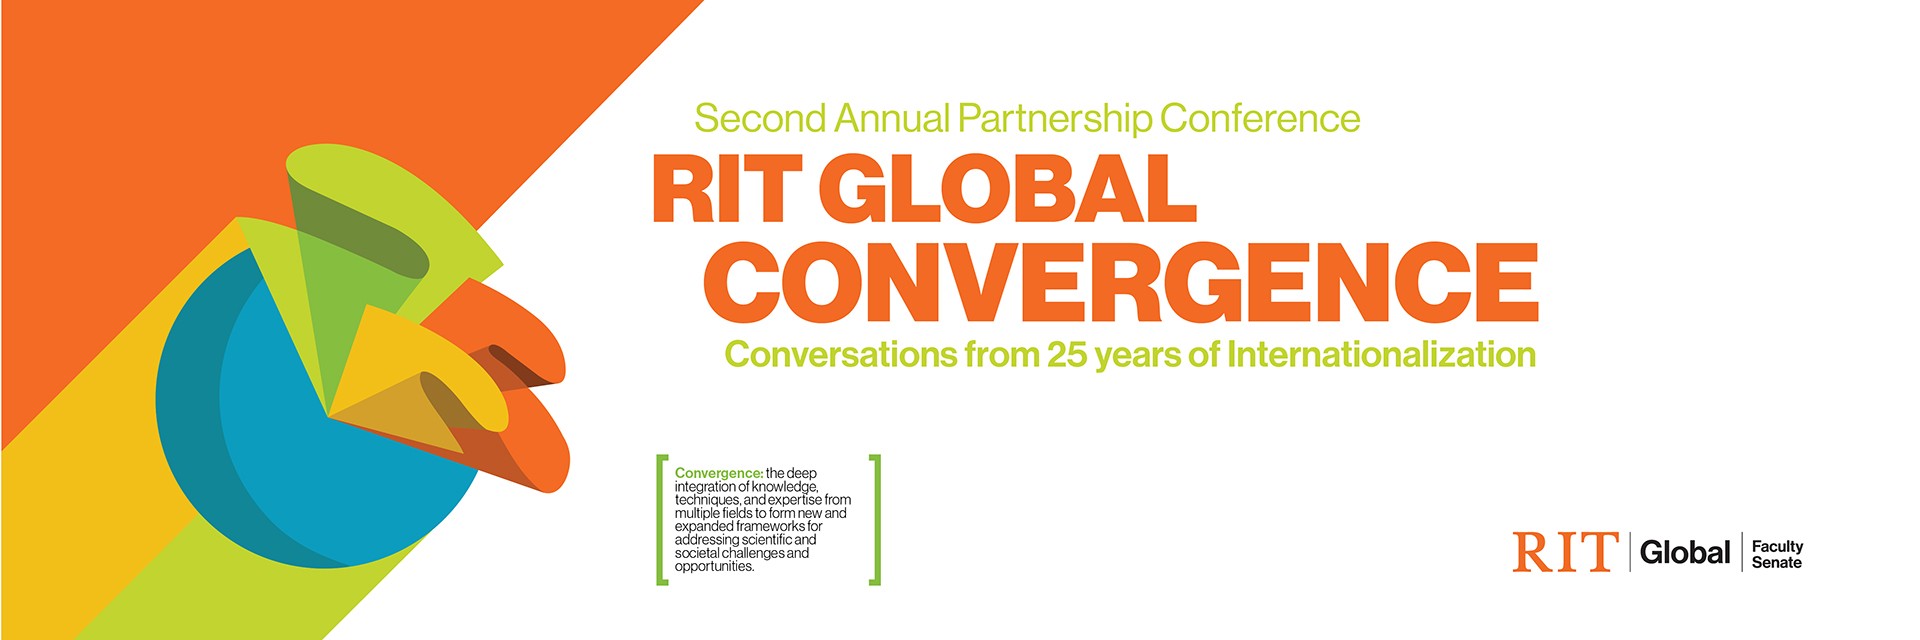 RIT Global Convergence graphic